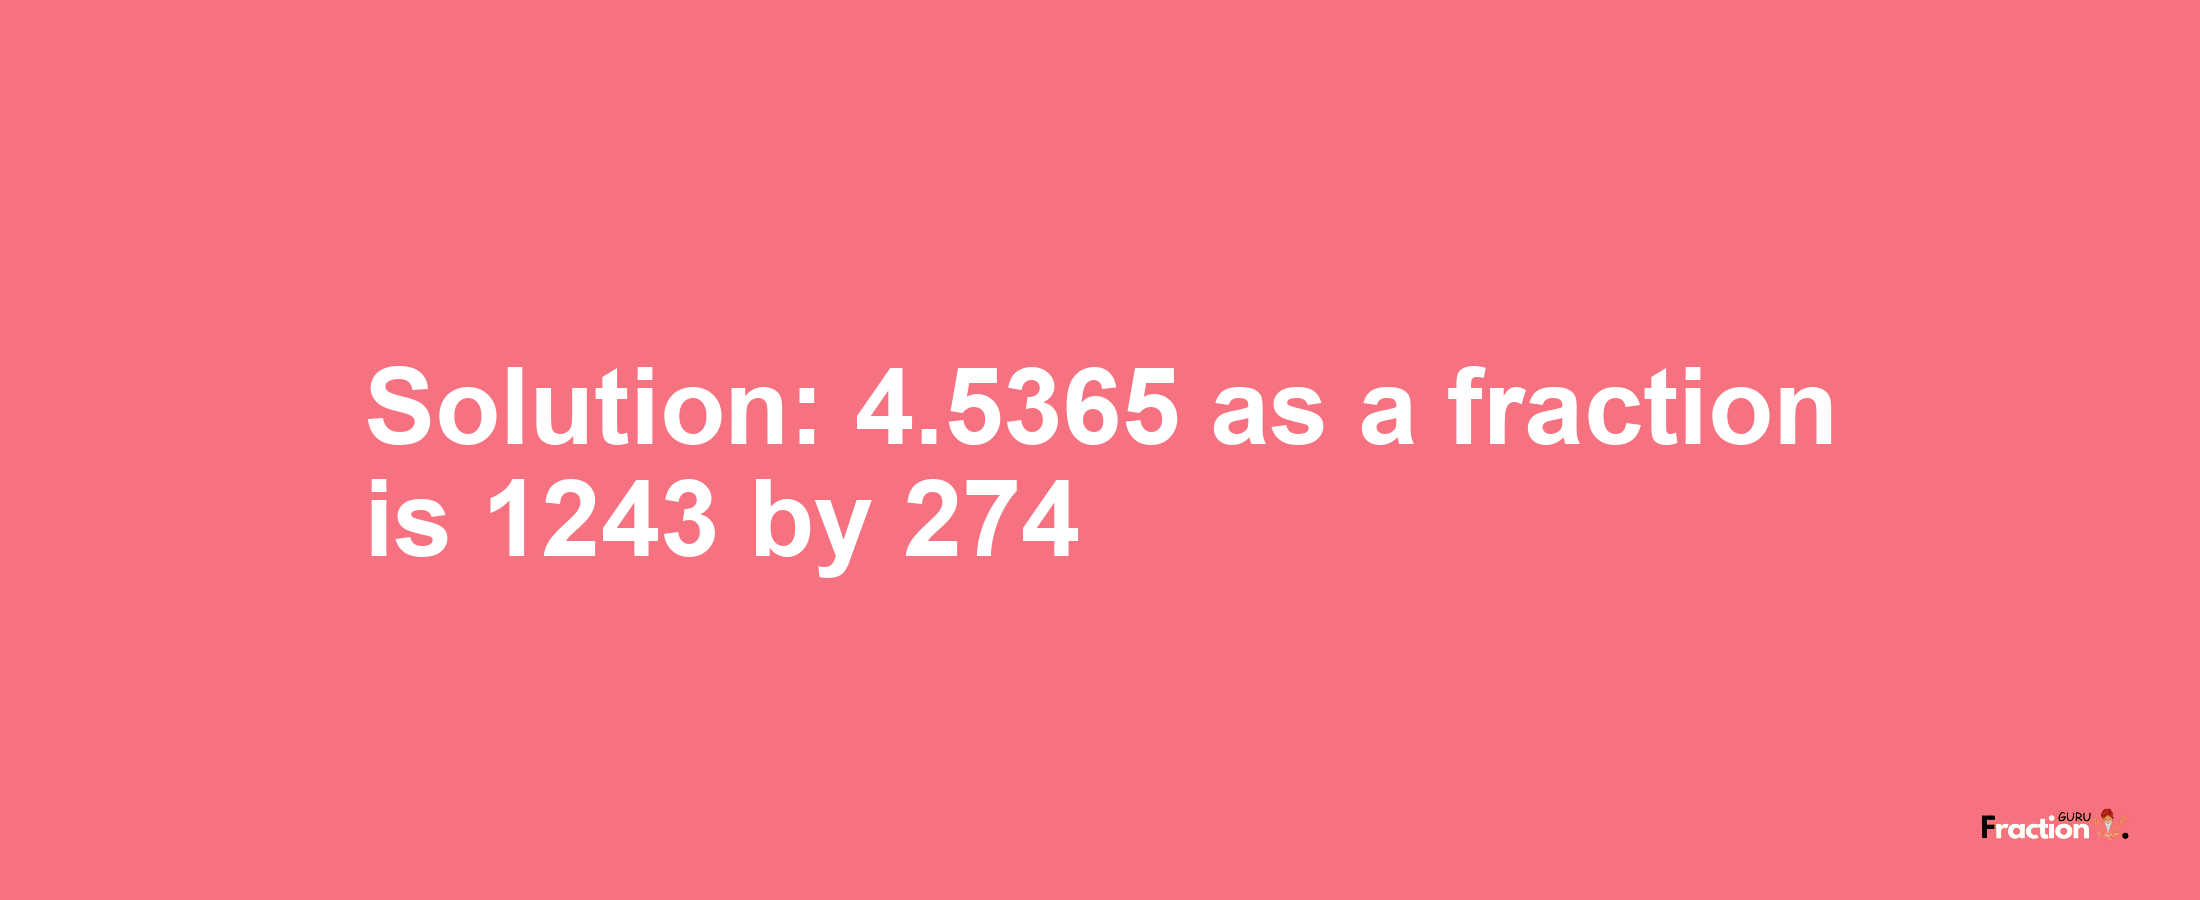 Solution:4.5365 as a fraction is 1243/274